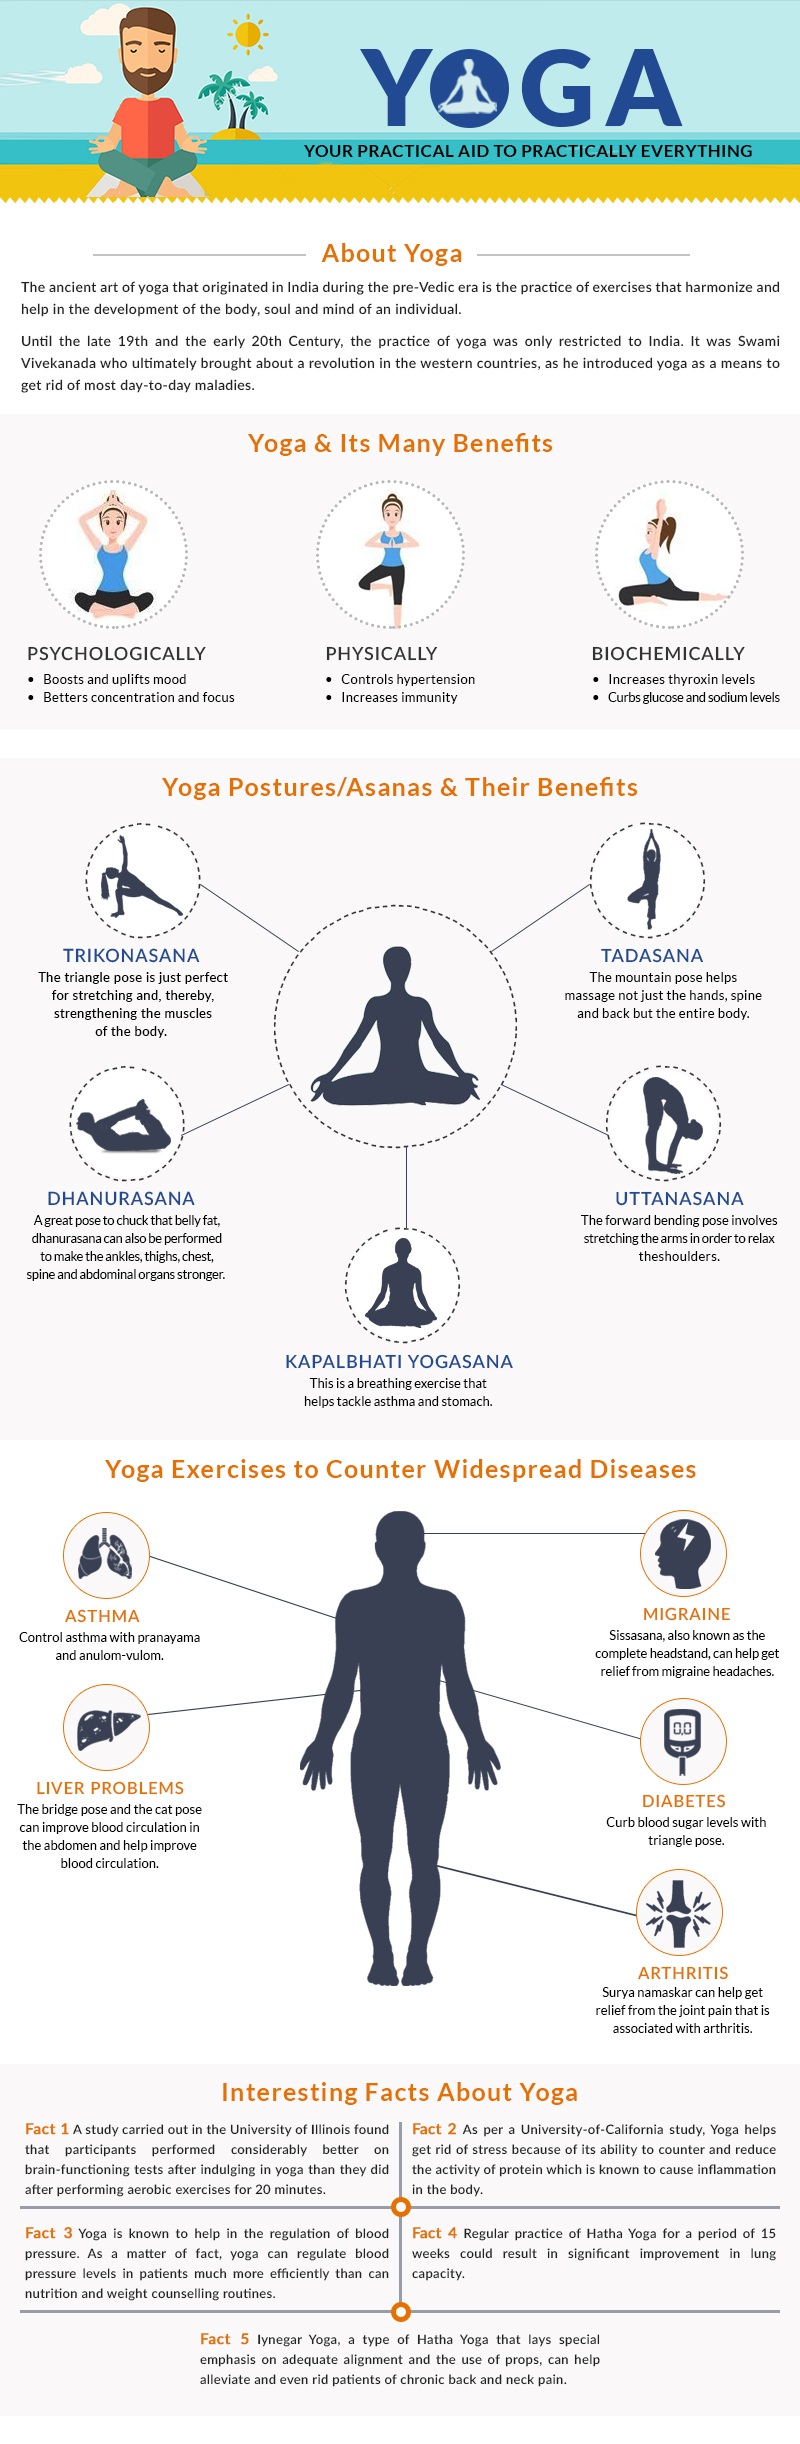 yoga-your-practical-aid-to-practically-everything